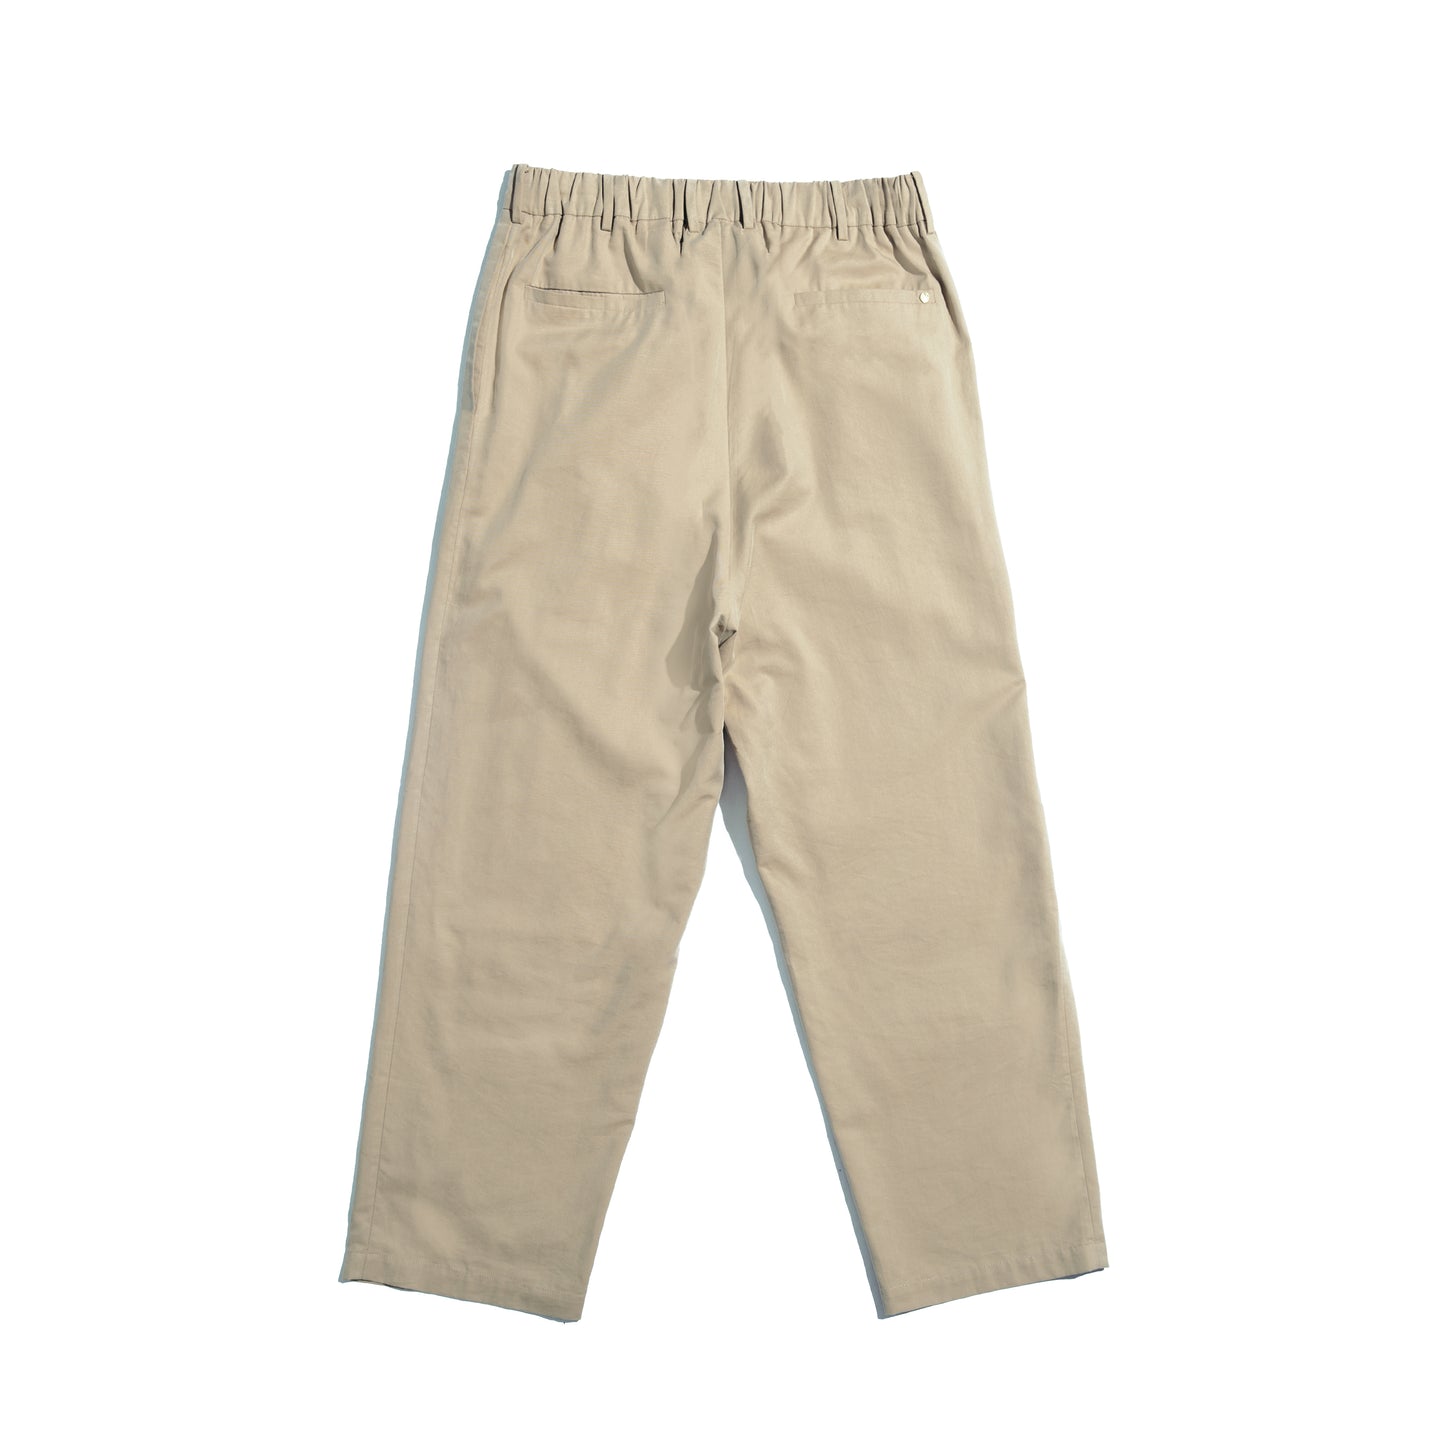 Faded Color Baggy Pants / White Sand